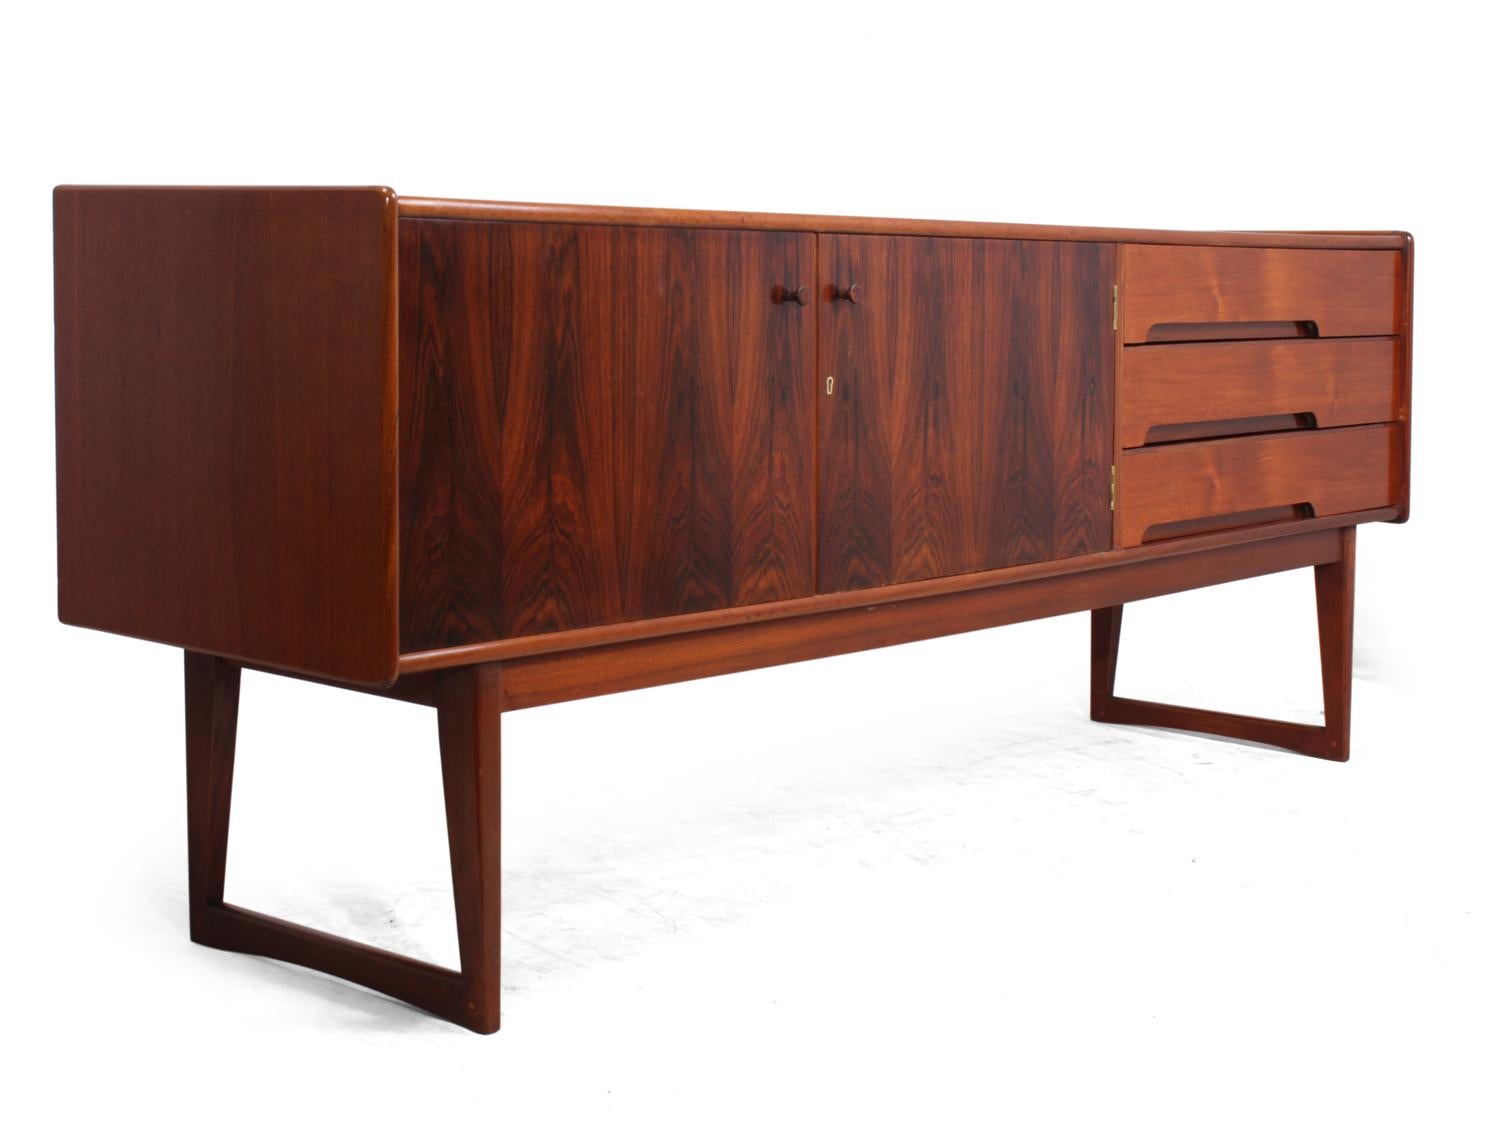 British Midcentury Rosewood and Teak Sideboard by Younger